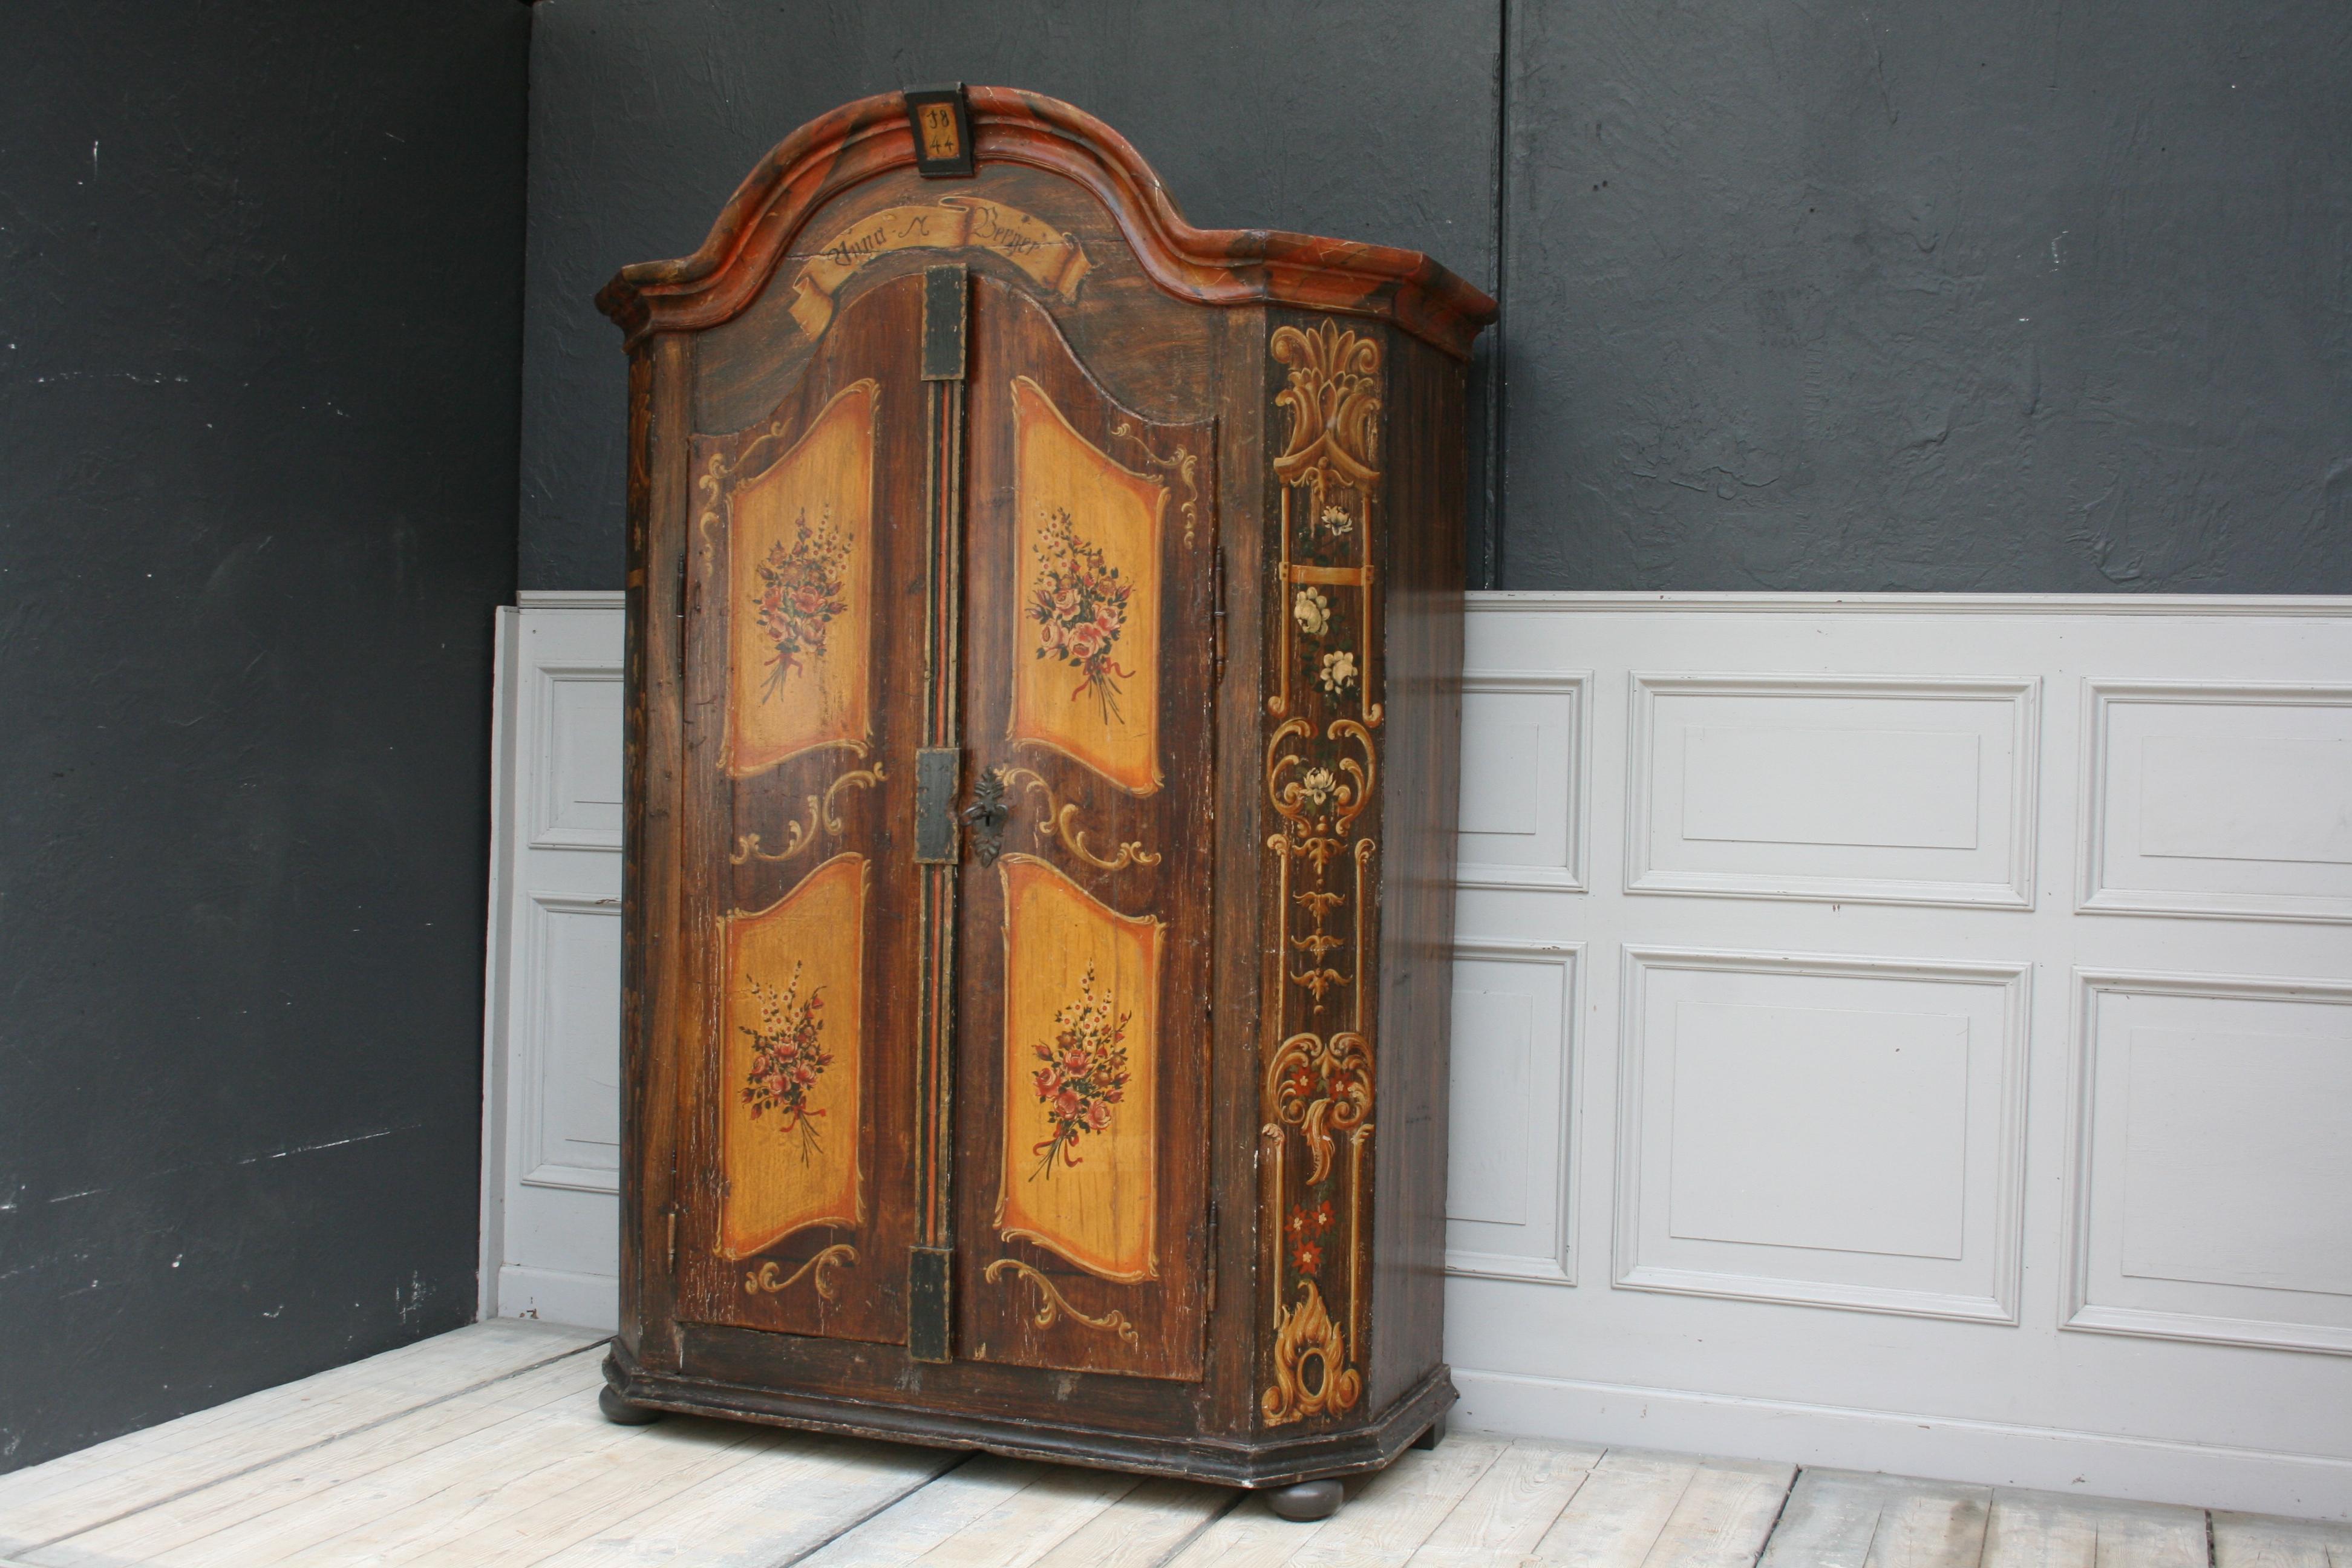 Antique hand painted Armoire from southern Germany with chamfered corners and a curved bonnet.
The hand painted number in the top indicates the date of manufacture of the cabinet, in 1844.
The 2 doors are hung with external hinges and can be